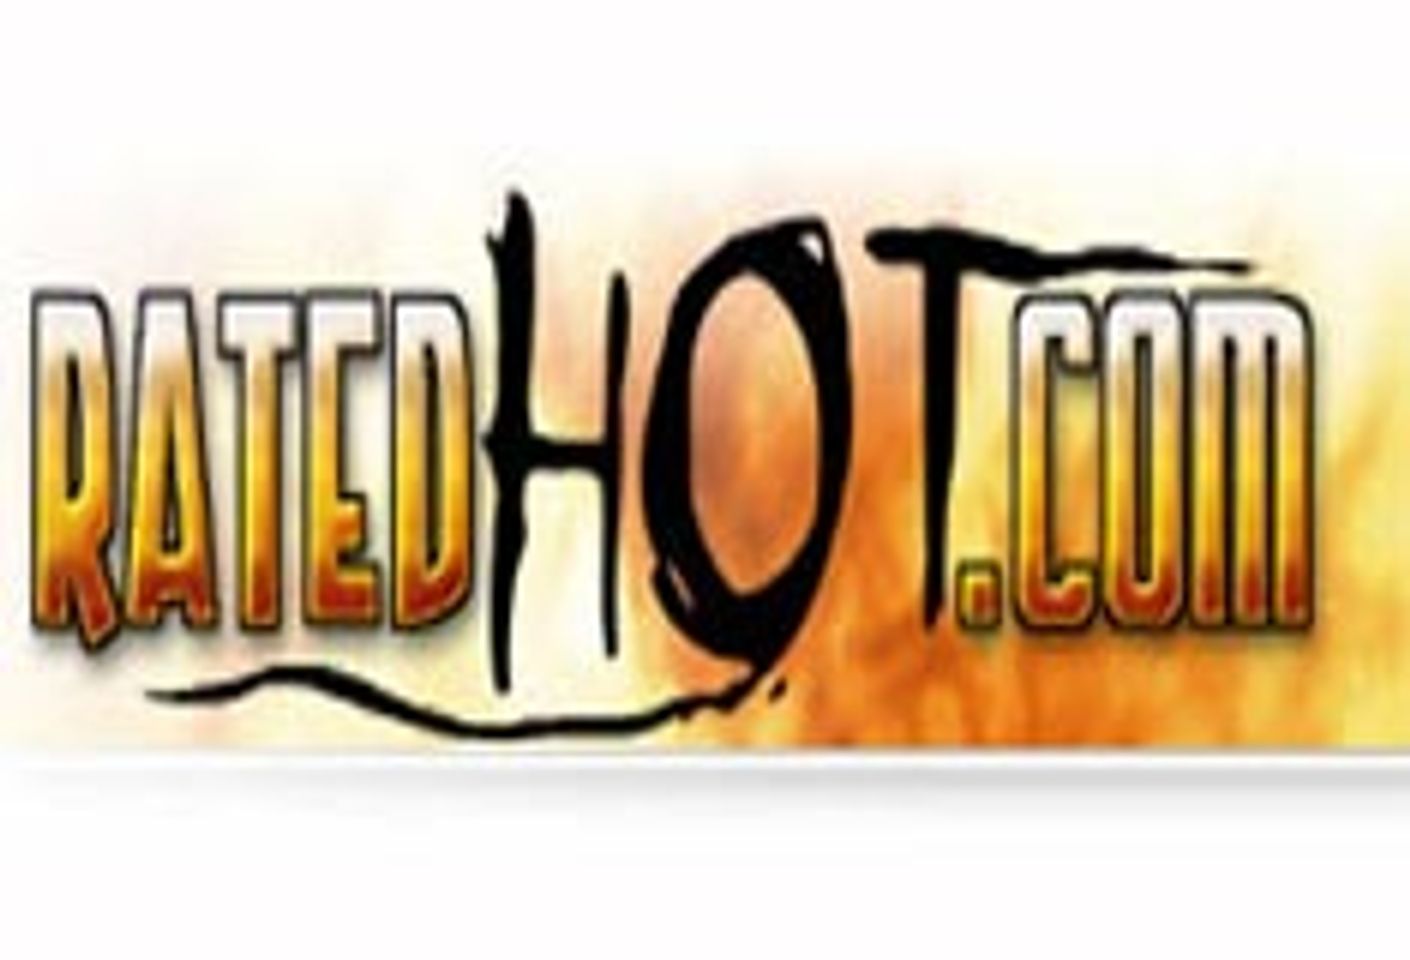 Rated Hot Launches Rated Hotties